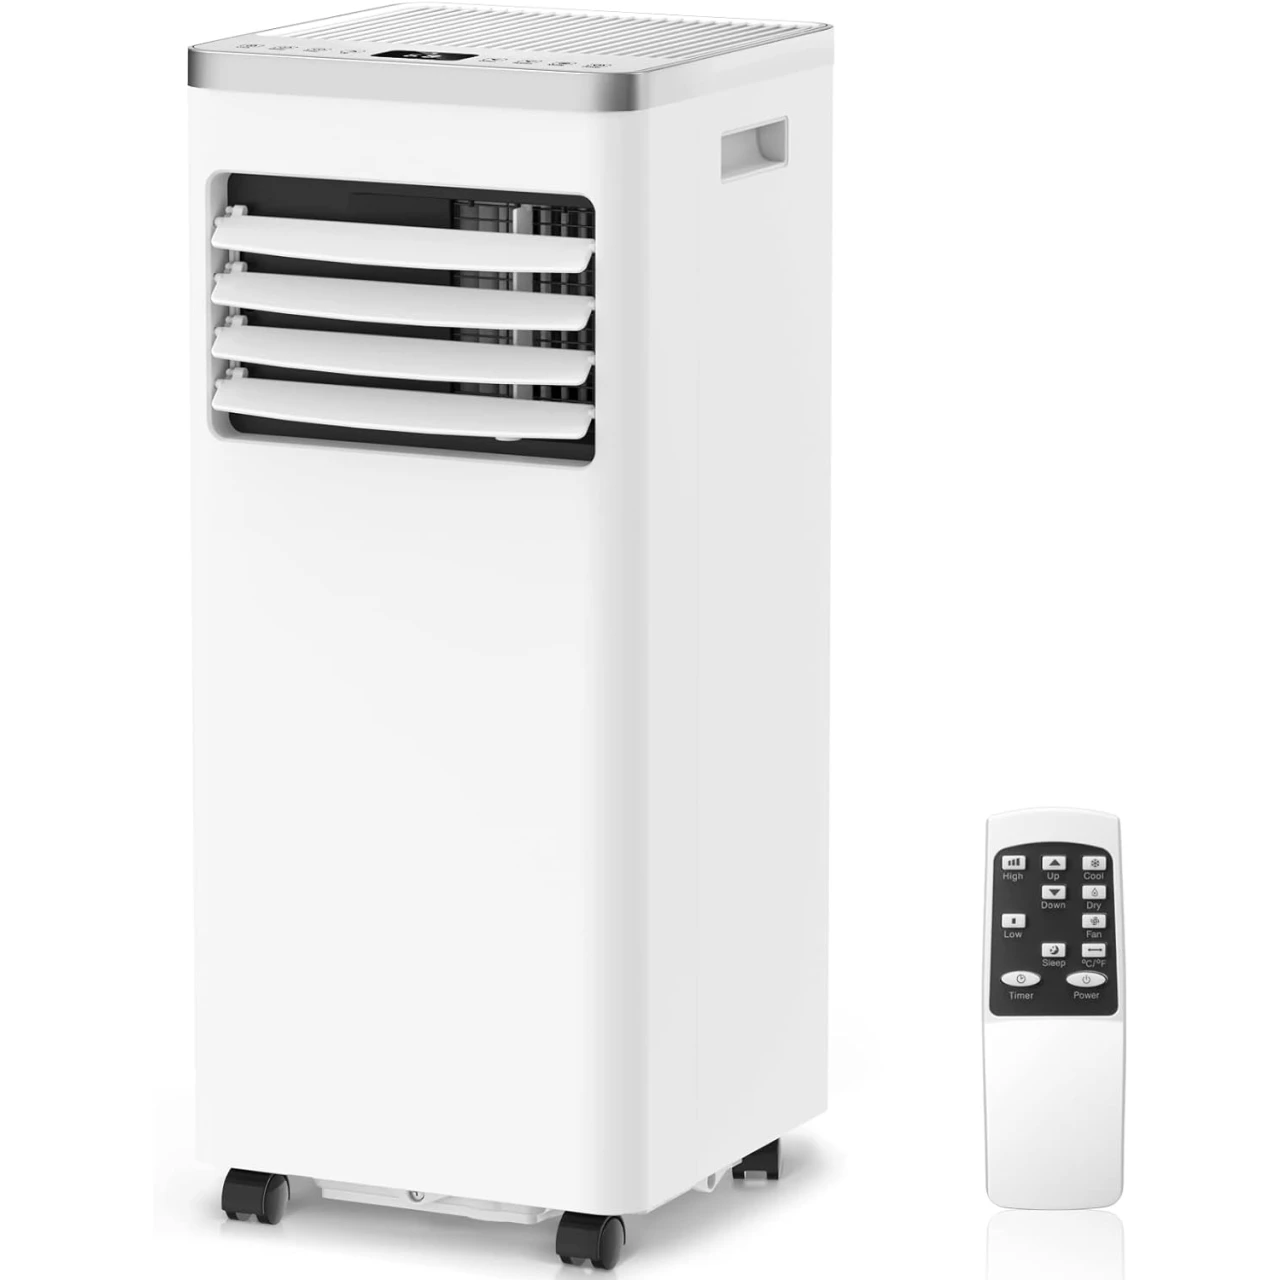 ZAFRO 10,000 BTU Portable Air Conditioners Cools up to 450 Sq.ft, Portable AC Built-in Cool, Dehumidifier, Fan Modes, Room Air Conditioner with Remote Control/Installation Kits, White